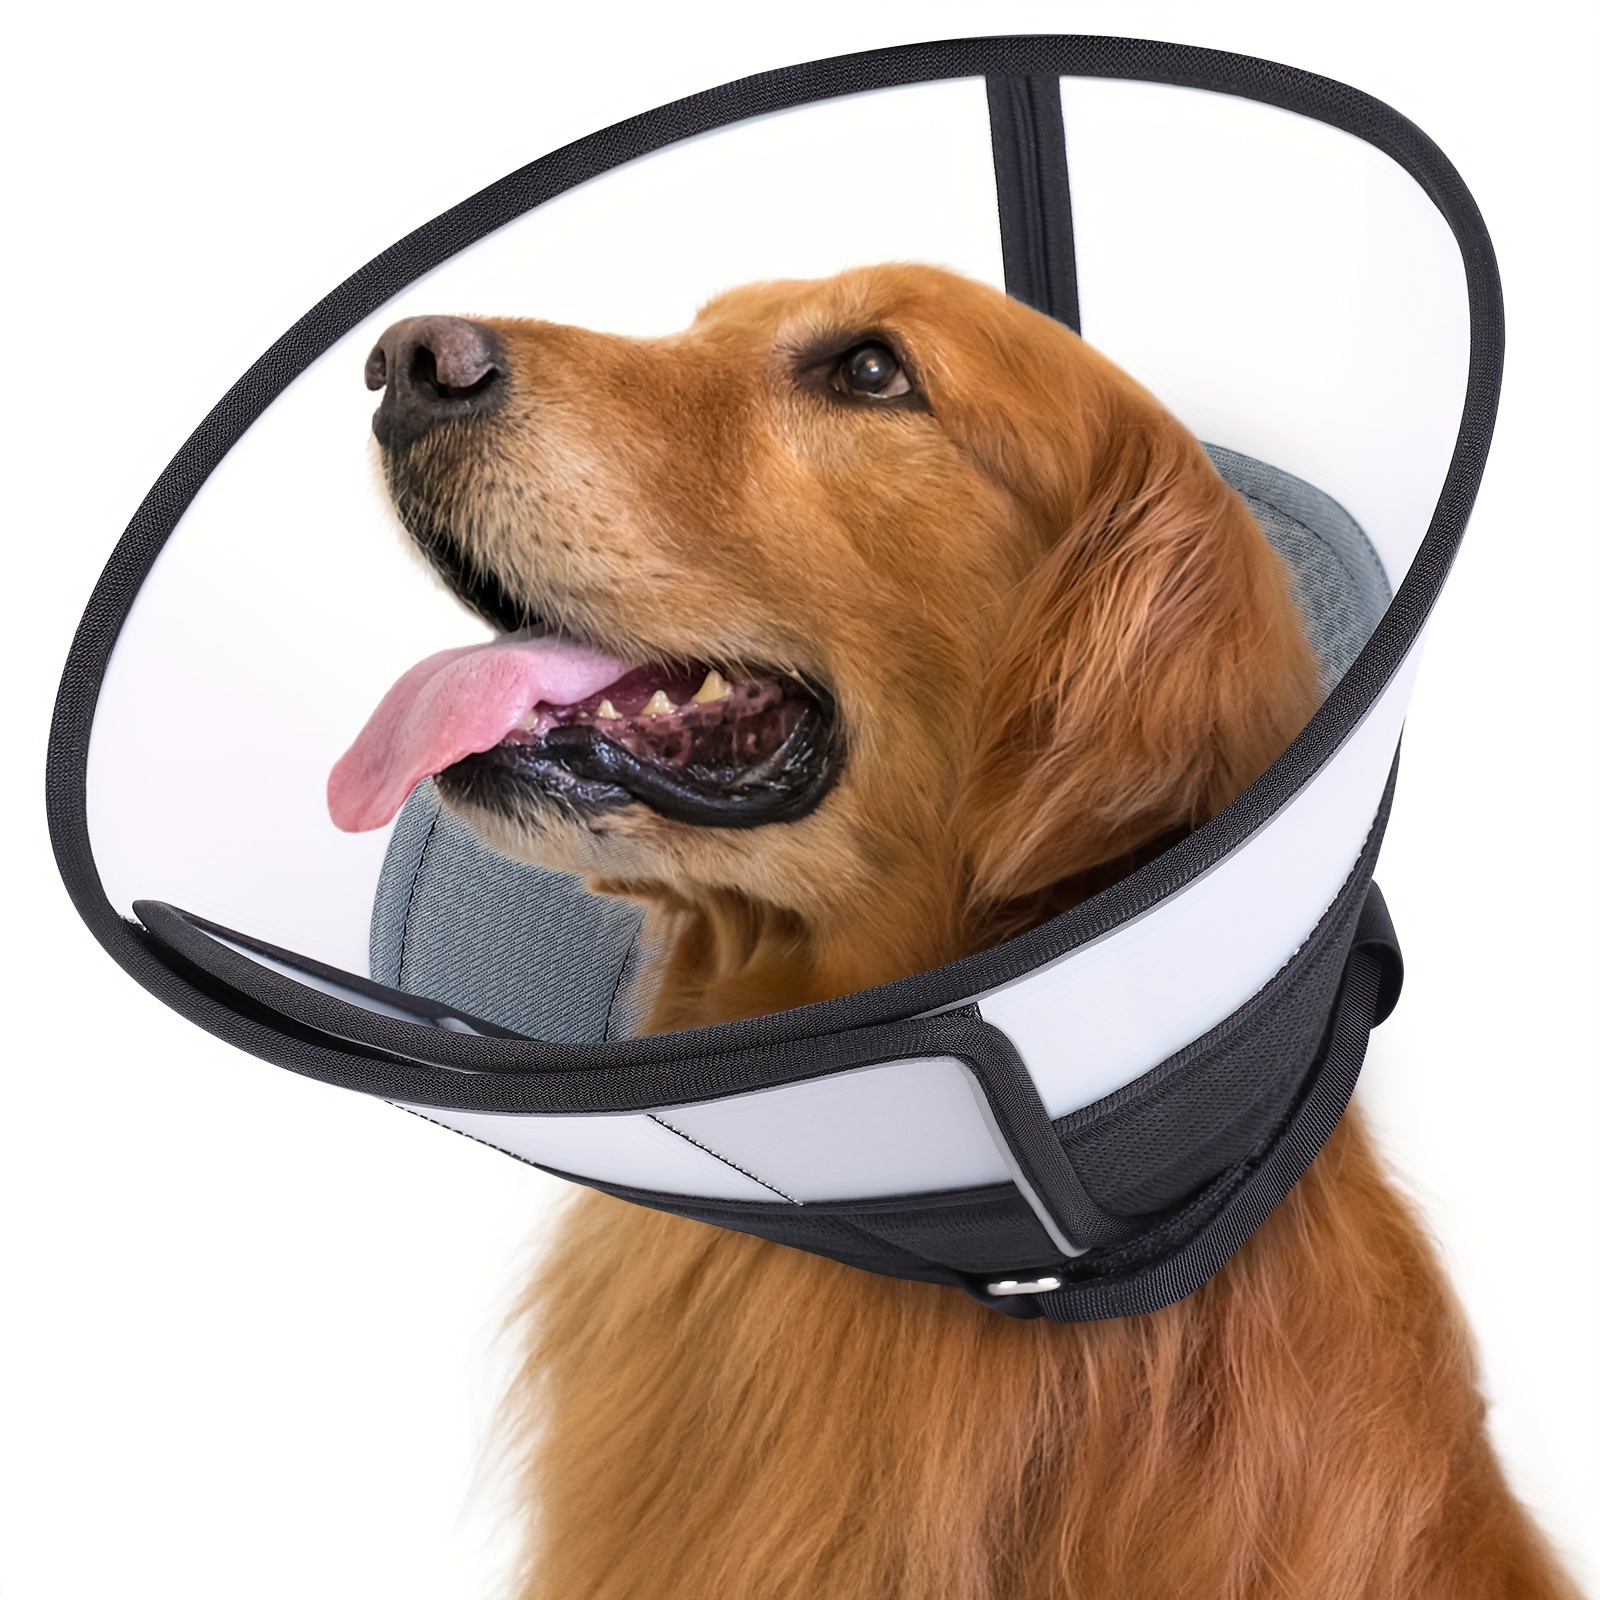 

Soft Dog Cone For Dogs After Surgery, Breathable Pet Recovery Collar For Large Medium Small Dogs And Cats, Adjustable Dog Cone Collar, Elizabethan Collar